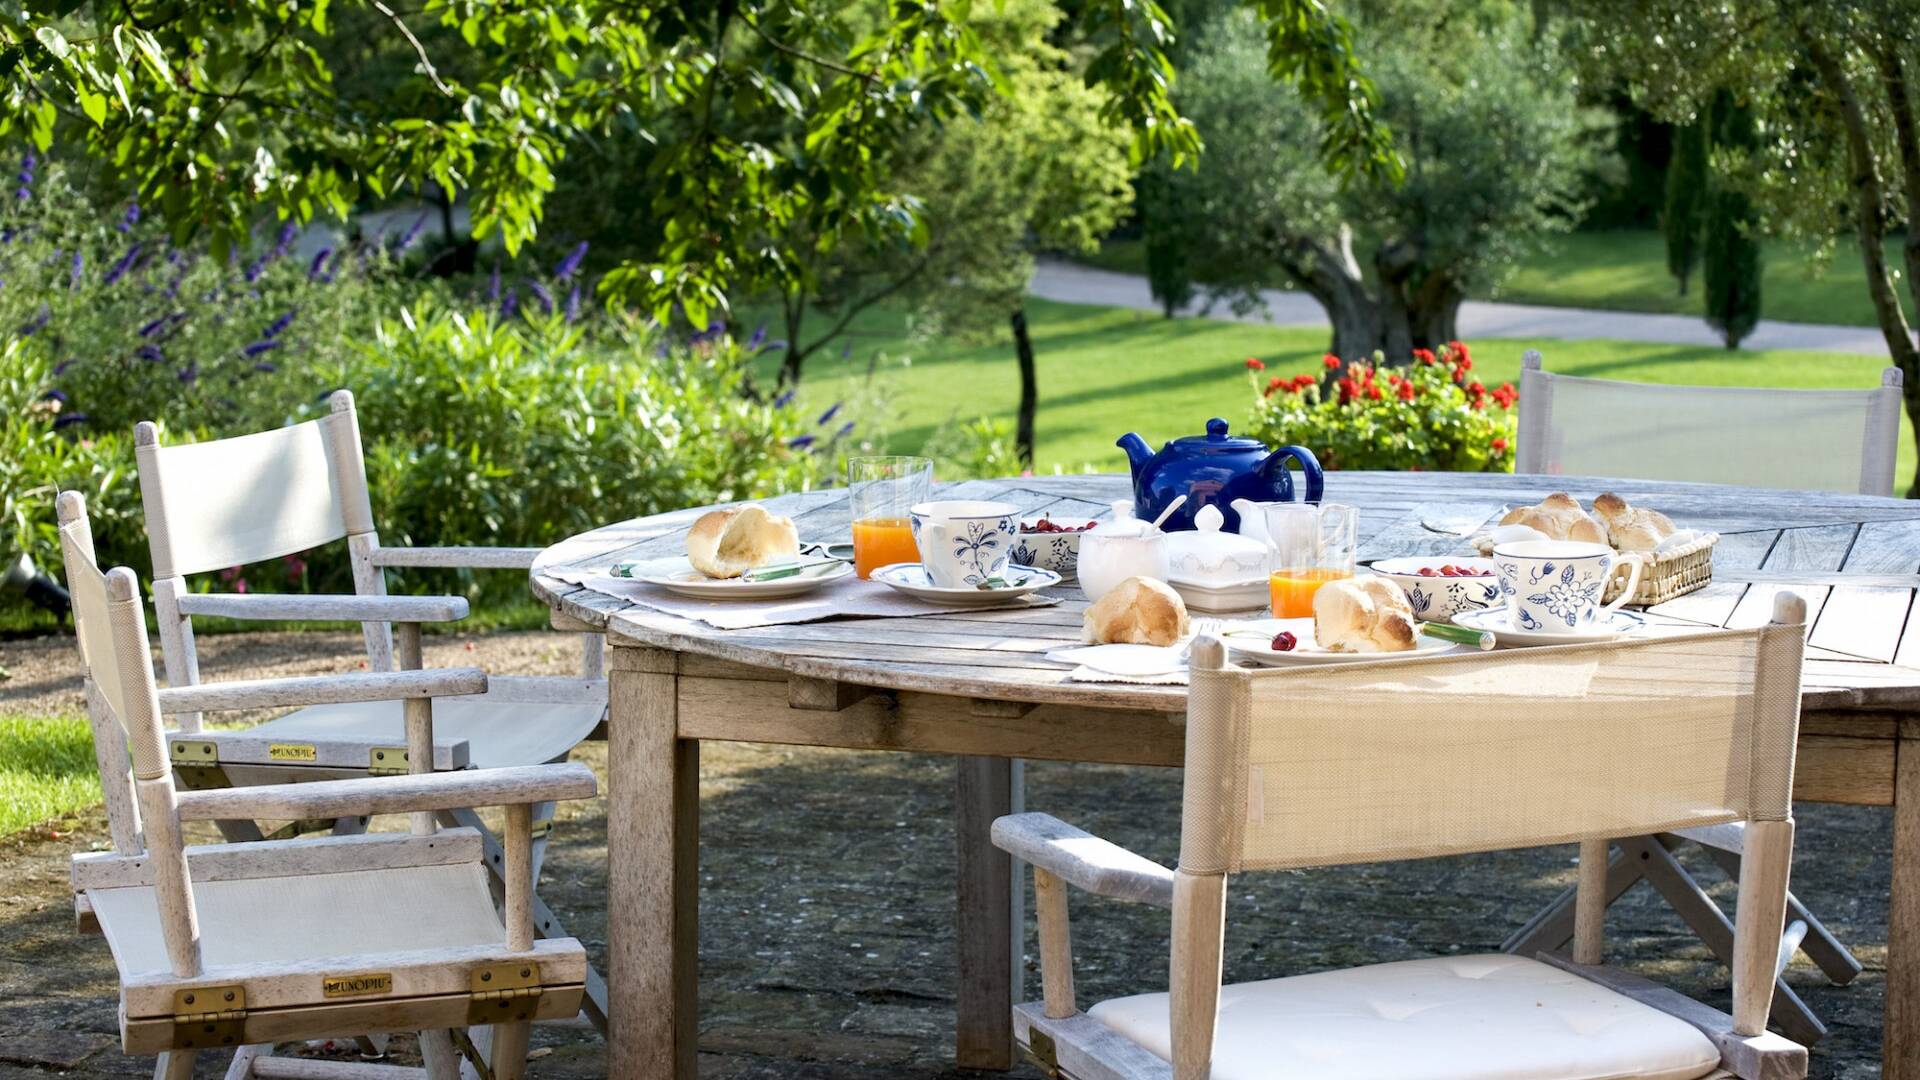 lovely outdoor eating table